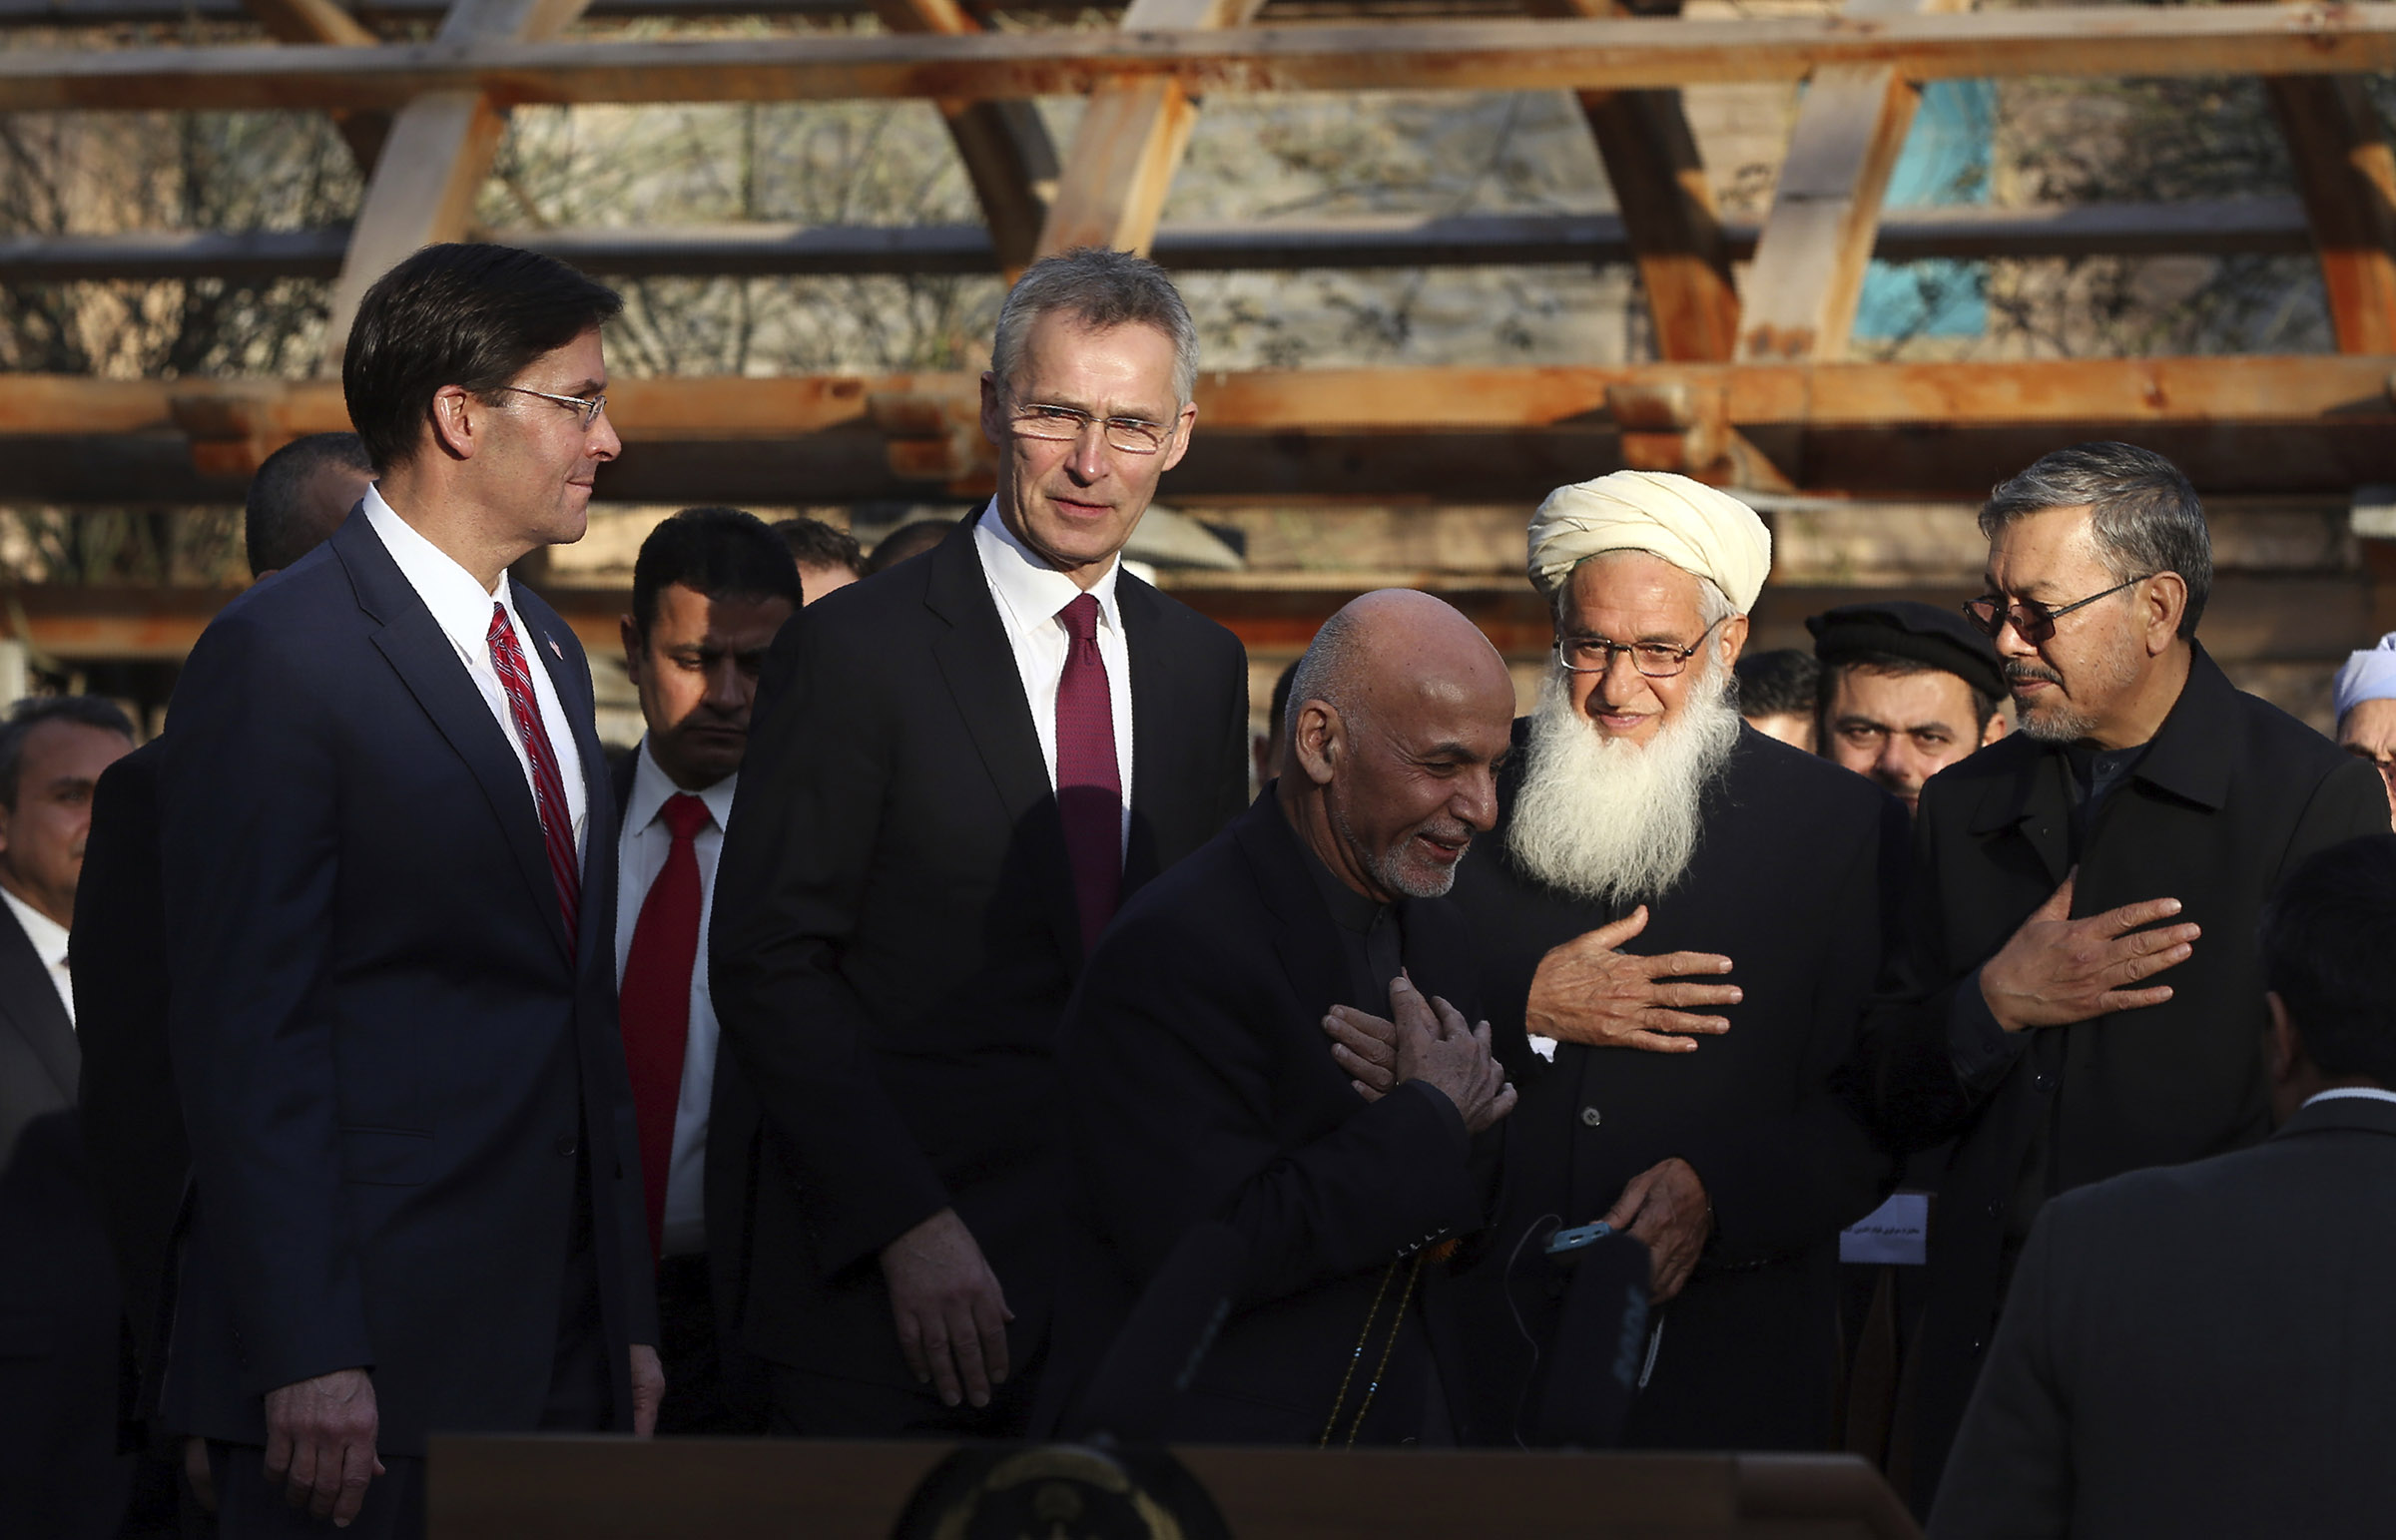 Afghan President Ashraf Ghani, center, arrives with NATO Secretary General Jens Stoltenberg, and U.S. Secretary of Defense Mark Esper for a joint news conference at the presidential palace in Kabul, Afghanistan on Feb. 29, 2020. (Rahmat Gul—AP)